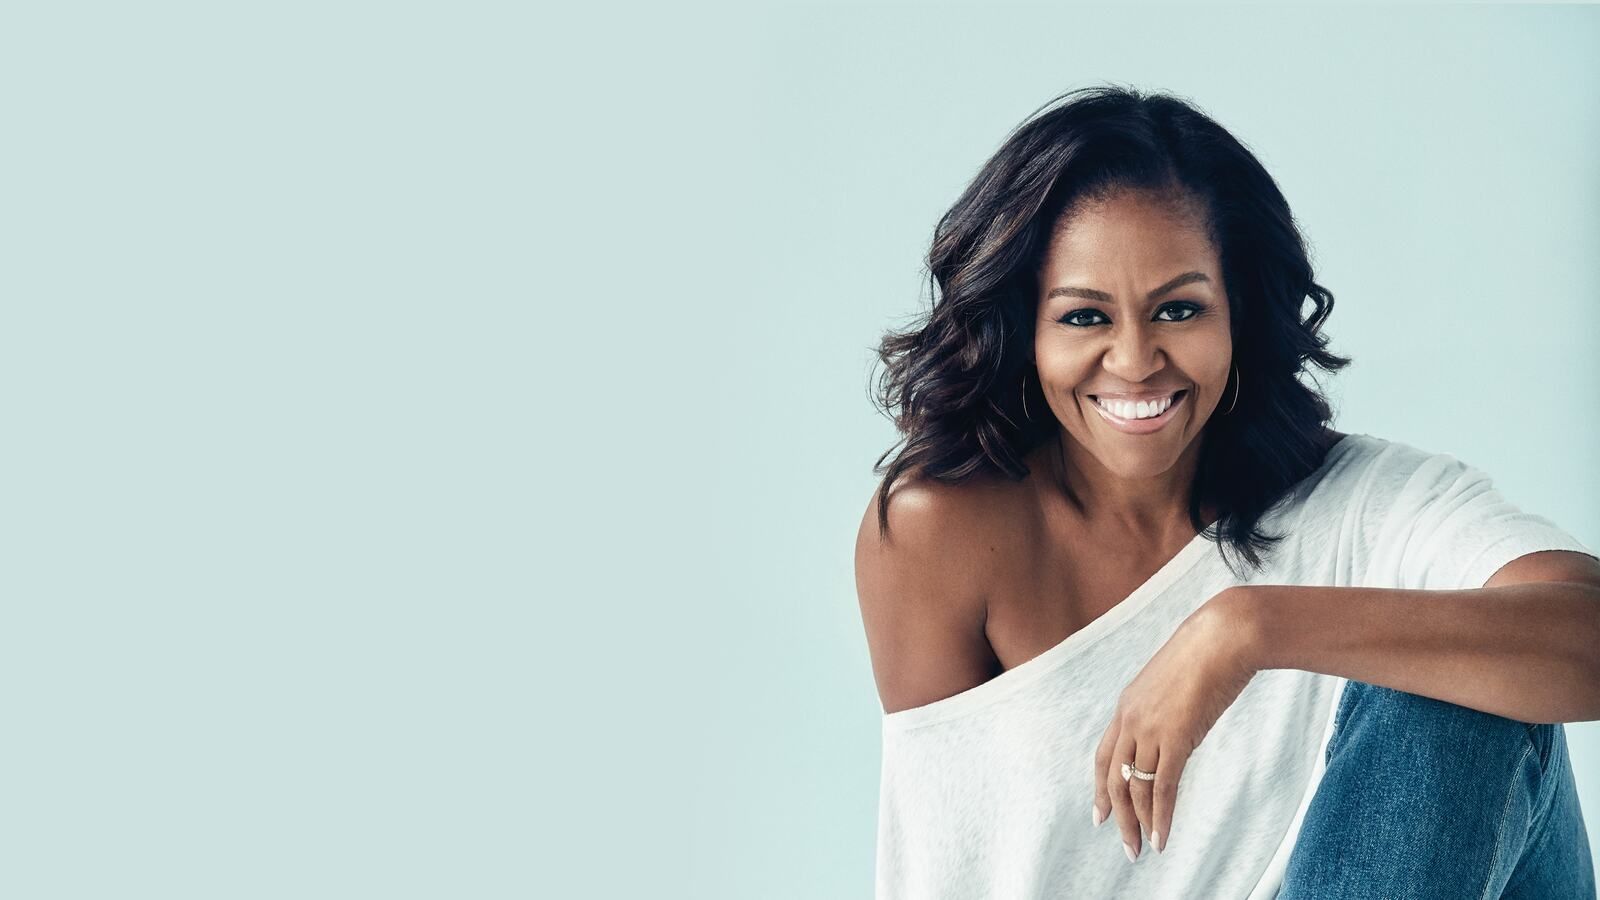 Michelle Obama Wallpapers posted by Zoey Peltier